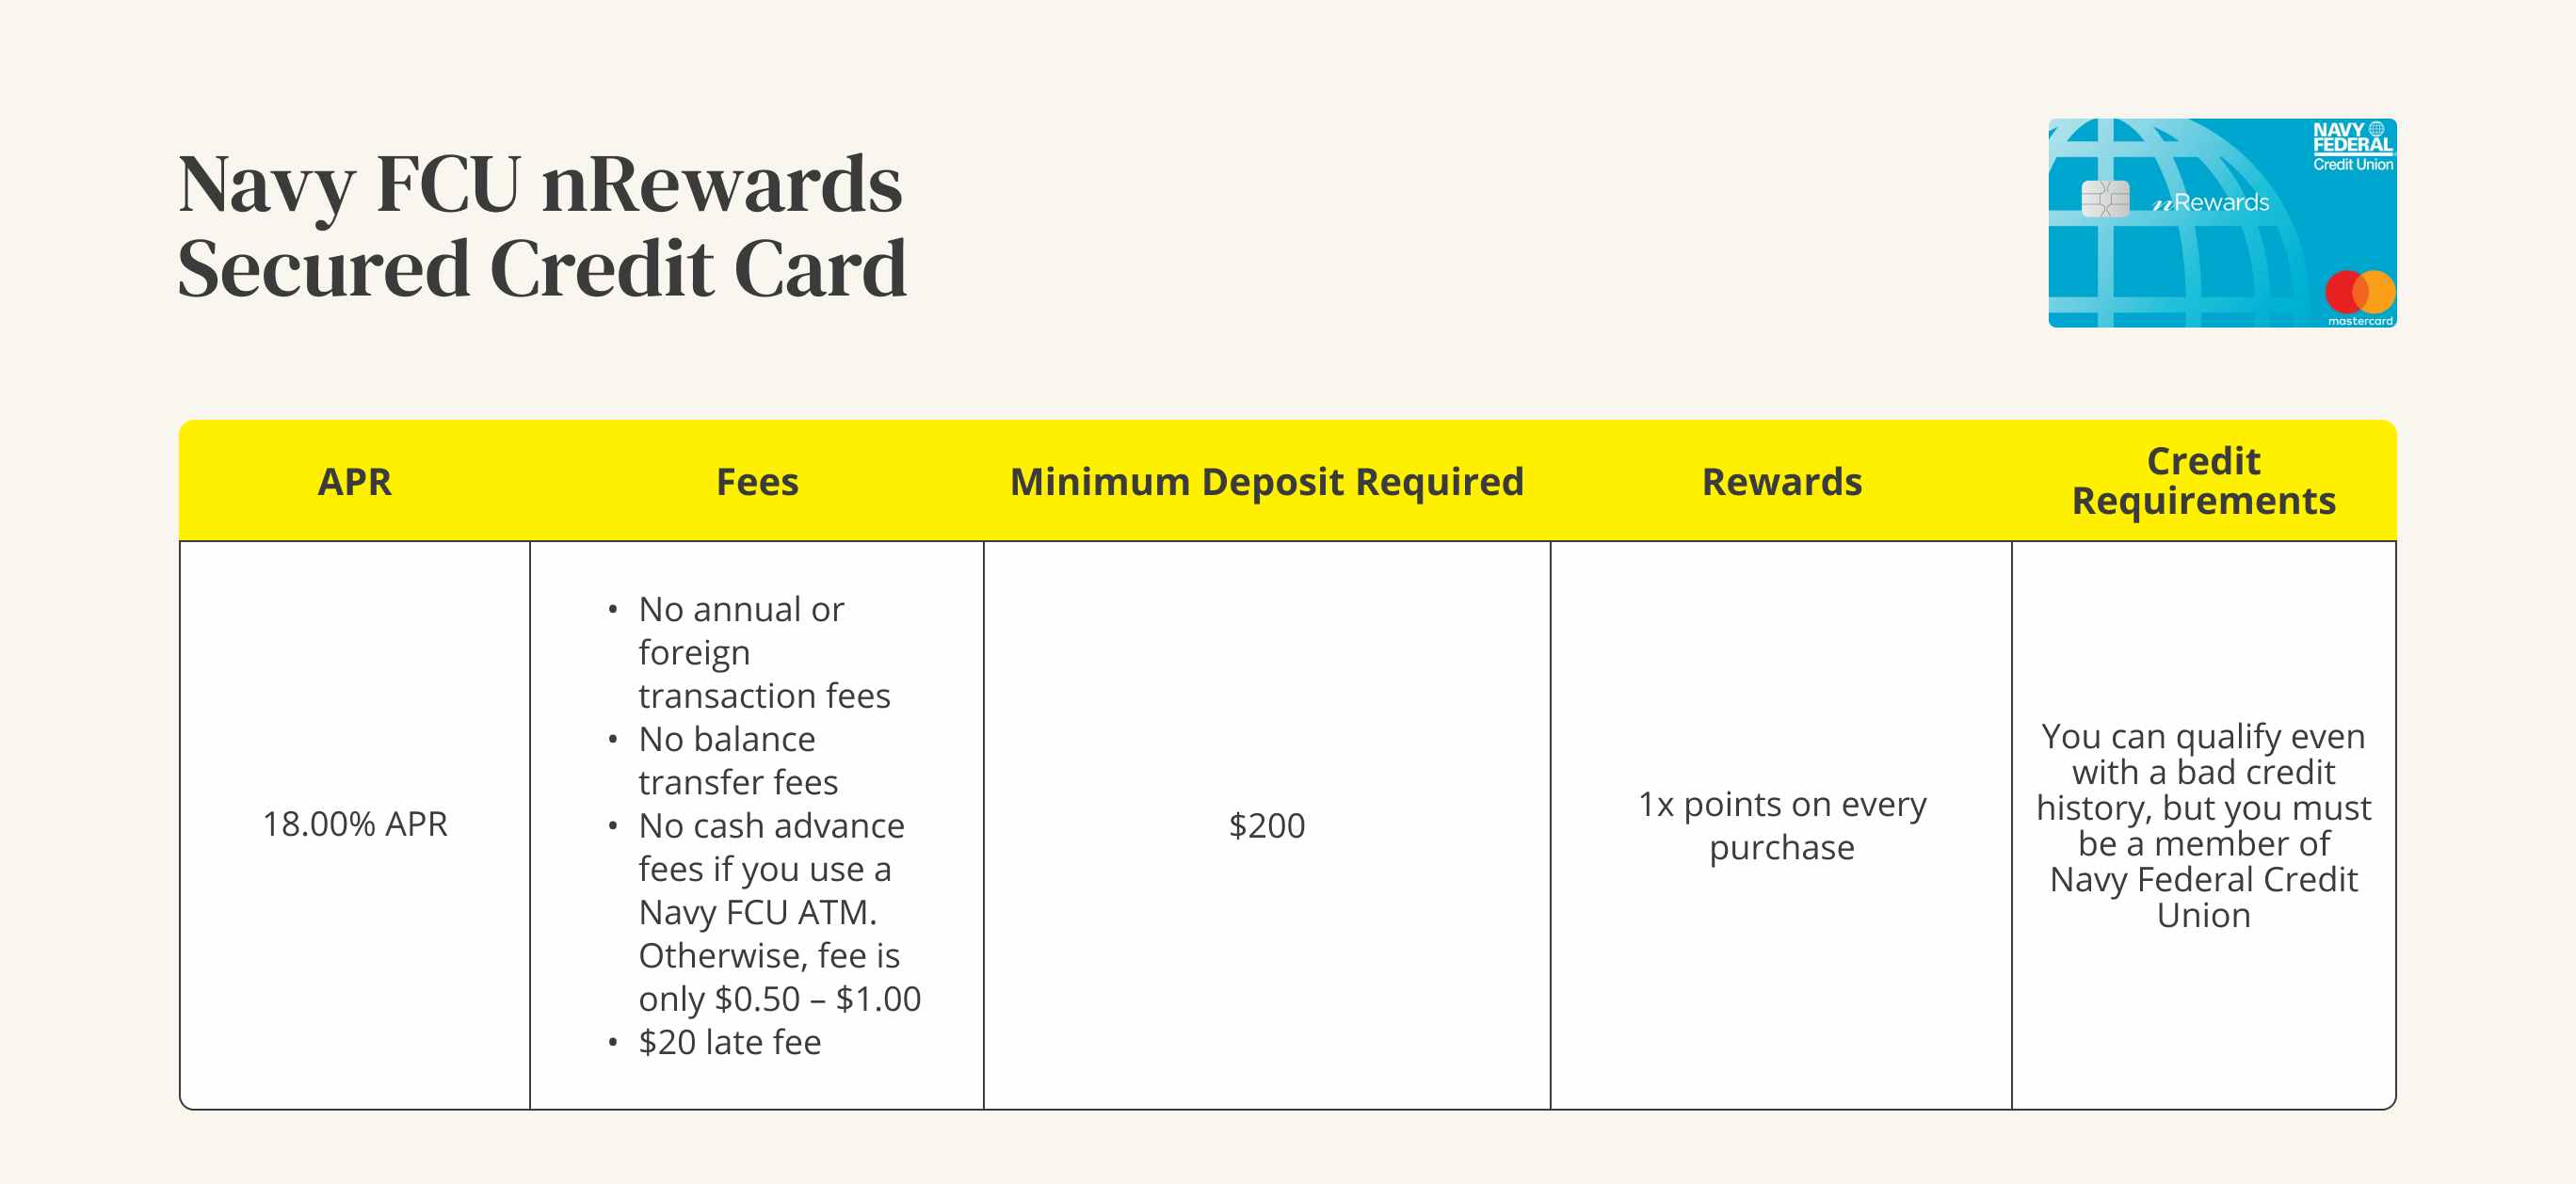 A graphic showing the APR, fees, minimum deposit, rewards, and credit requirements for a Navy FCU nRewards Secured credit card